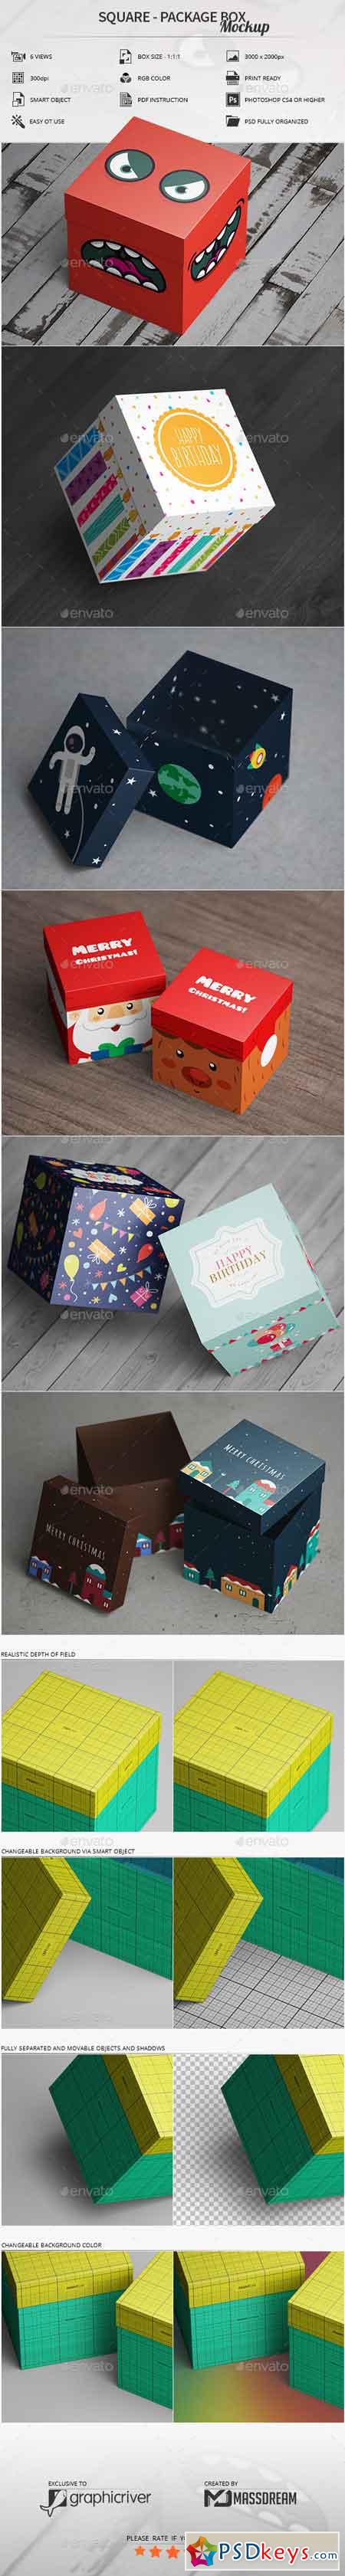 Square - Package Box Mockup 16435967